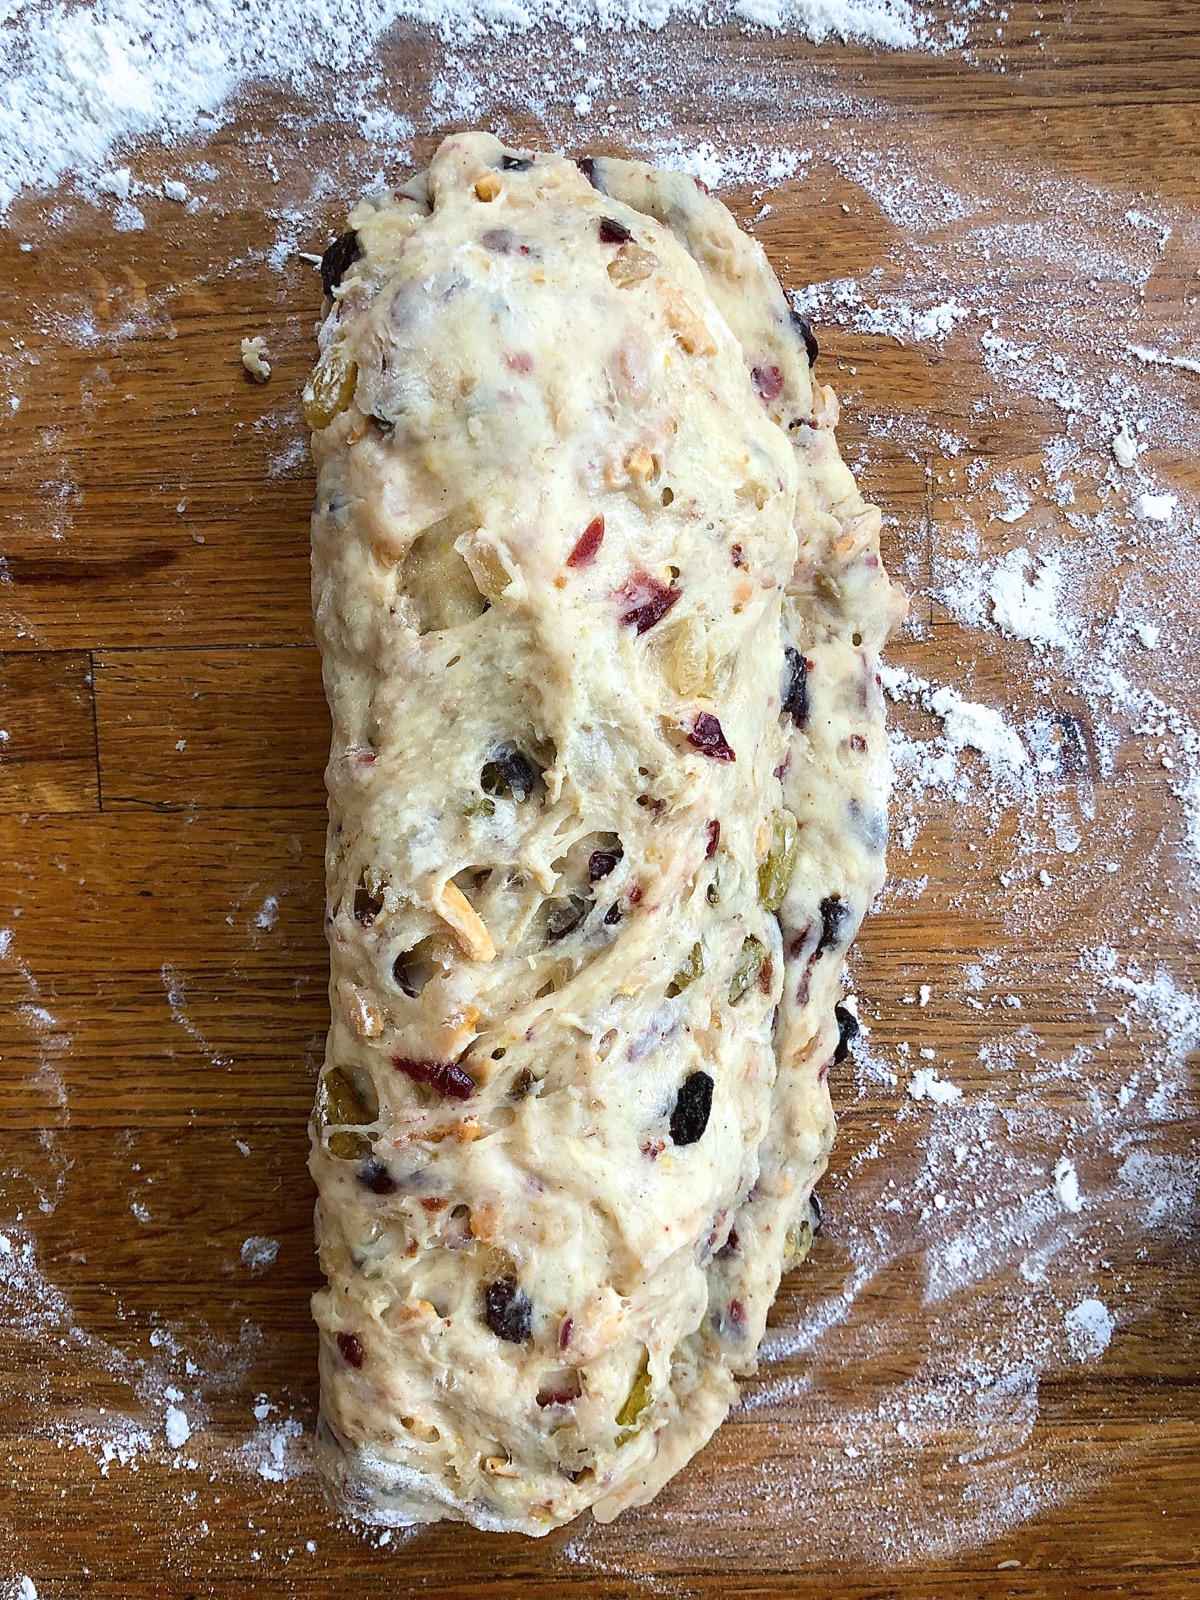 Shaped stollen ready to move to a baking sheet to rise.